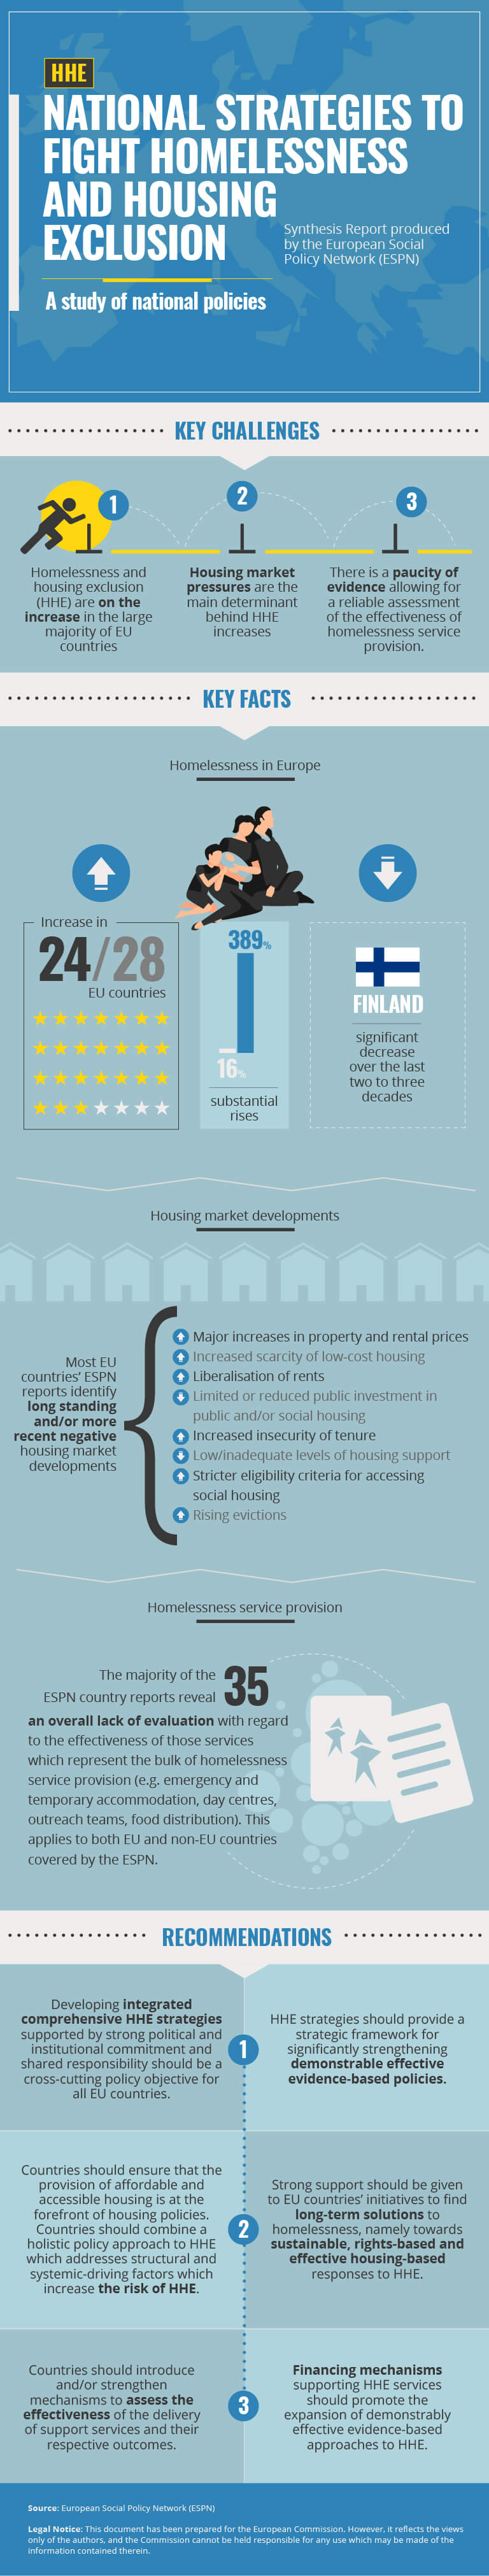 National Strategies to Fight Homelessness and Housing Exclusion